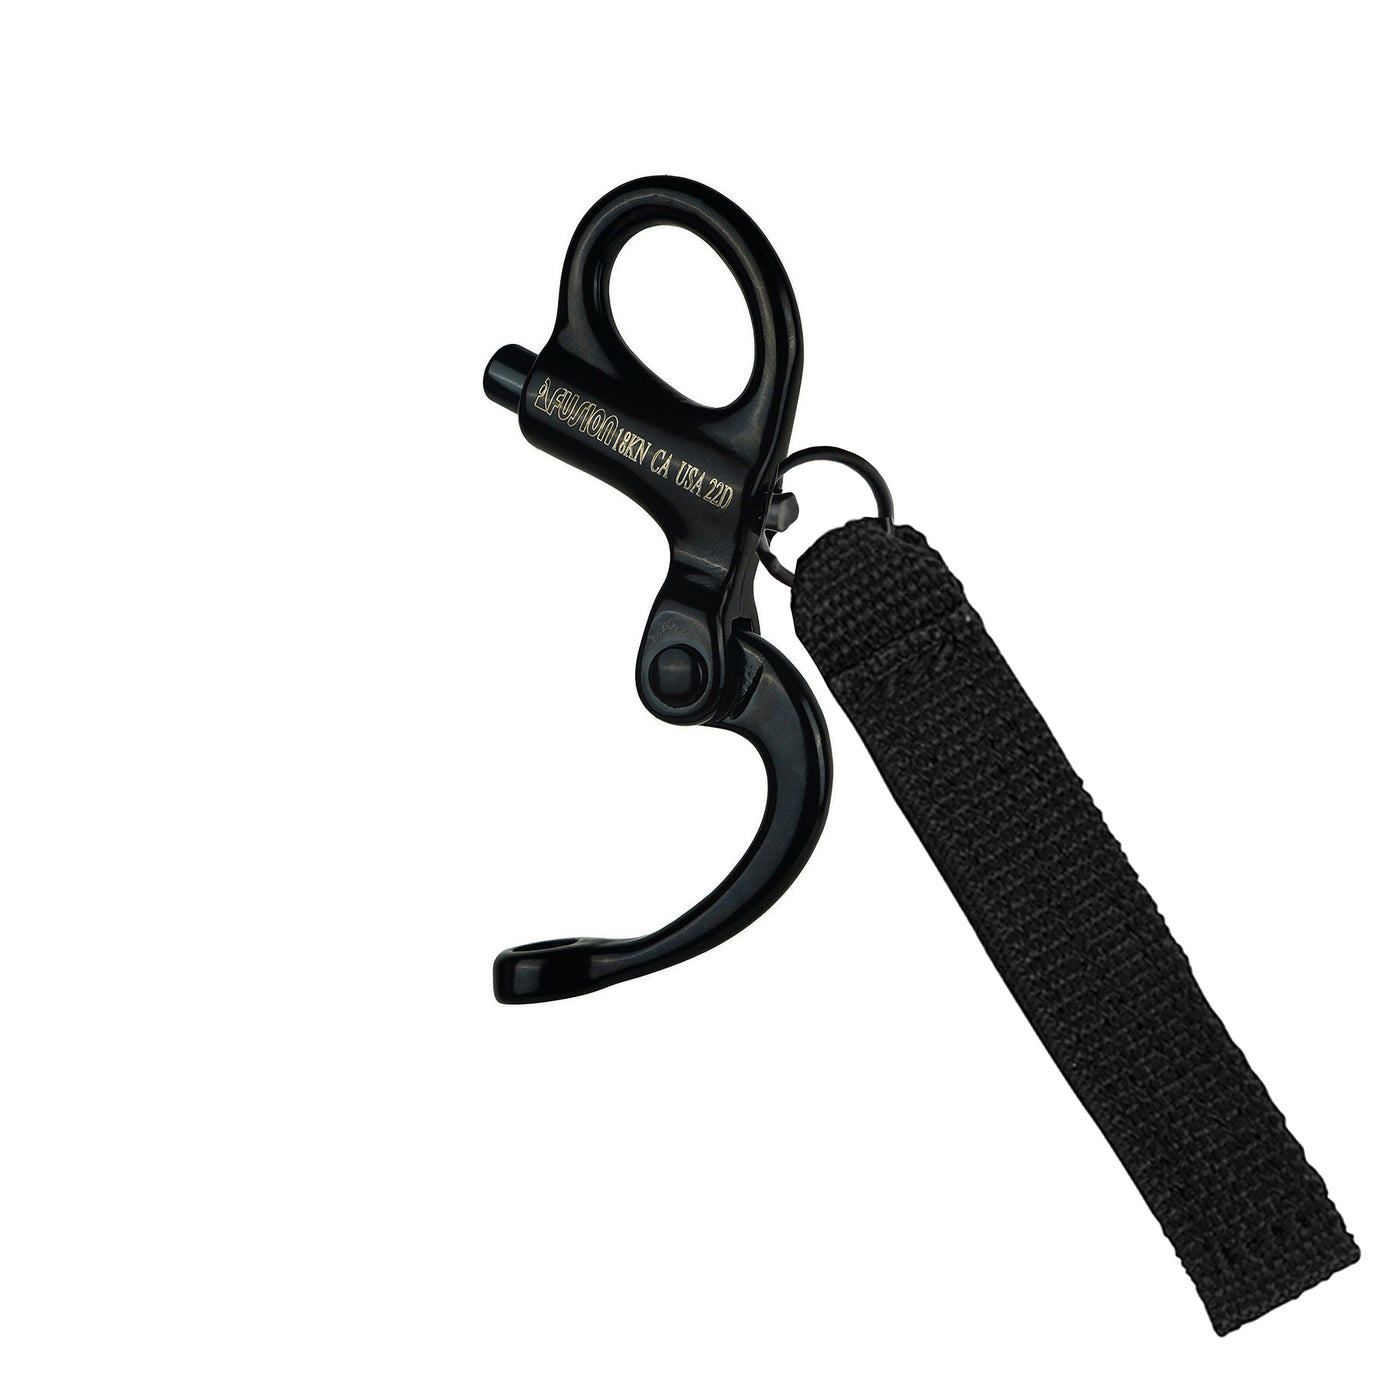 2" Snap Shackle With Fixed Eye - With pull strap - Black